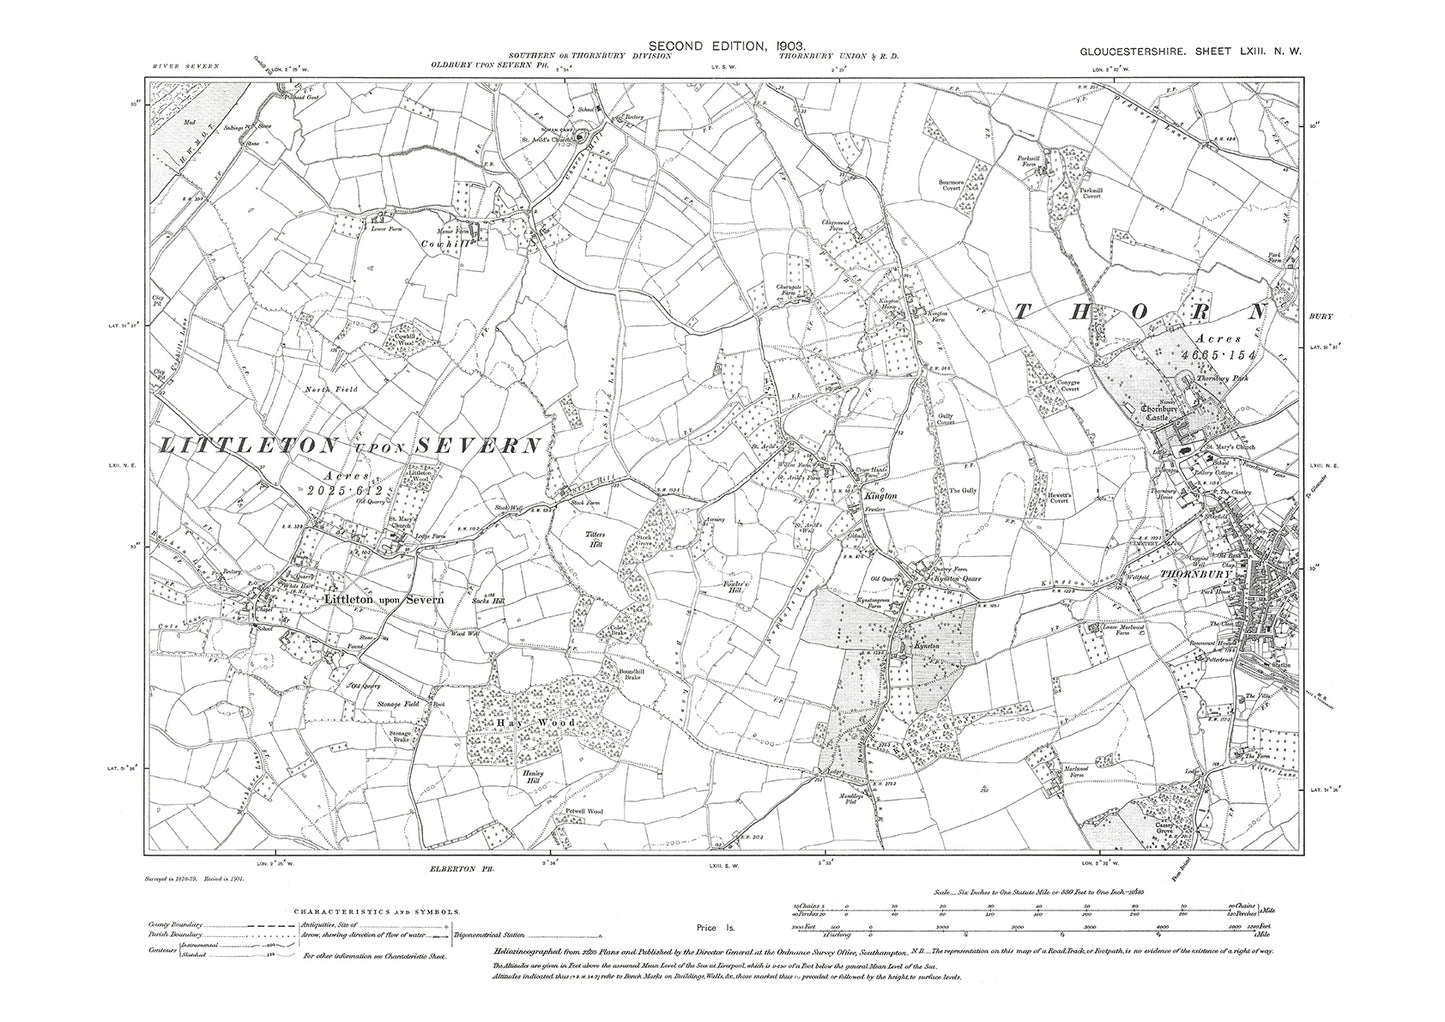 Old OS map dated 1903, showing Thornbury, Littleton upon Severn in Gloucestershire - 63NW